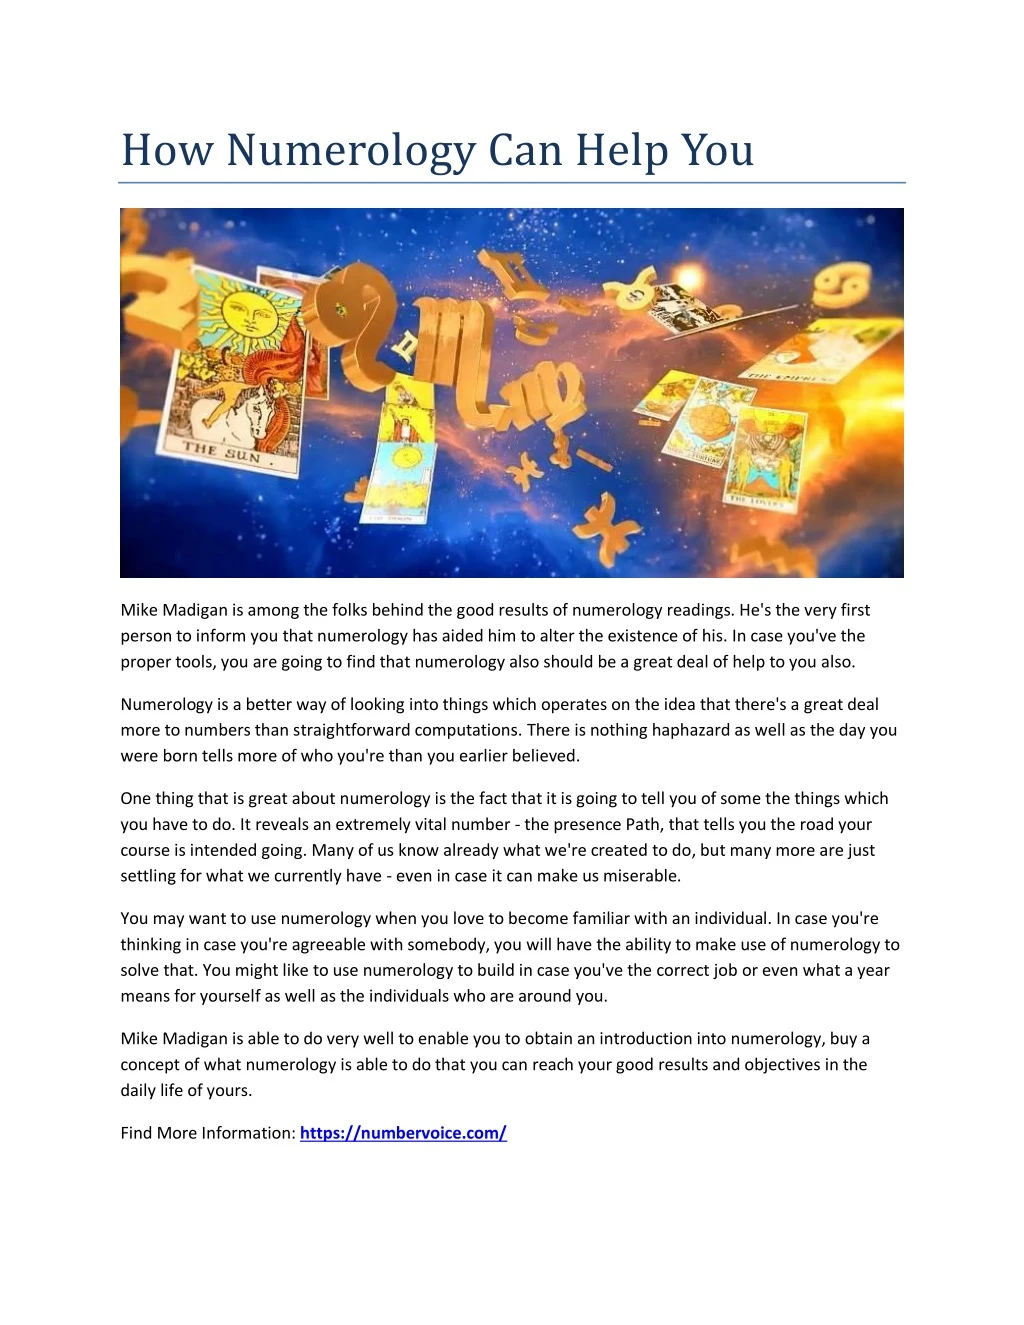 how numerology can help you